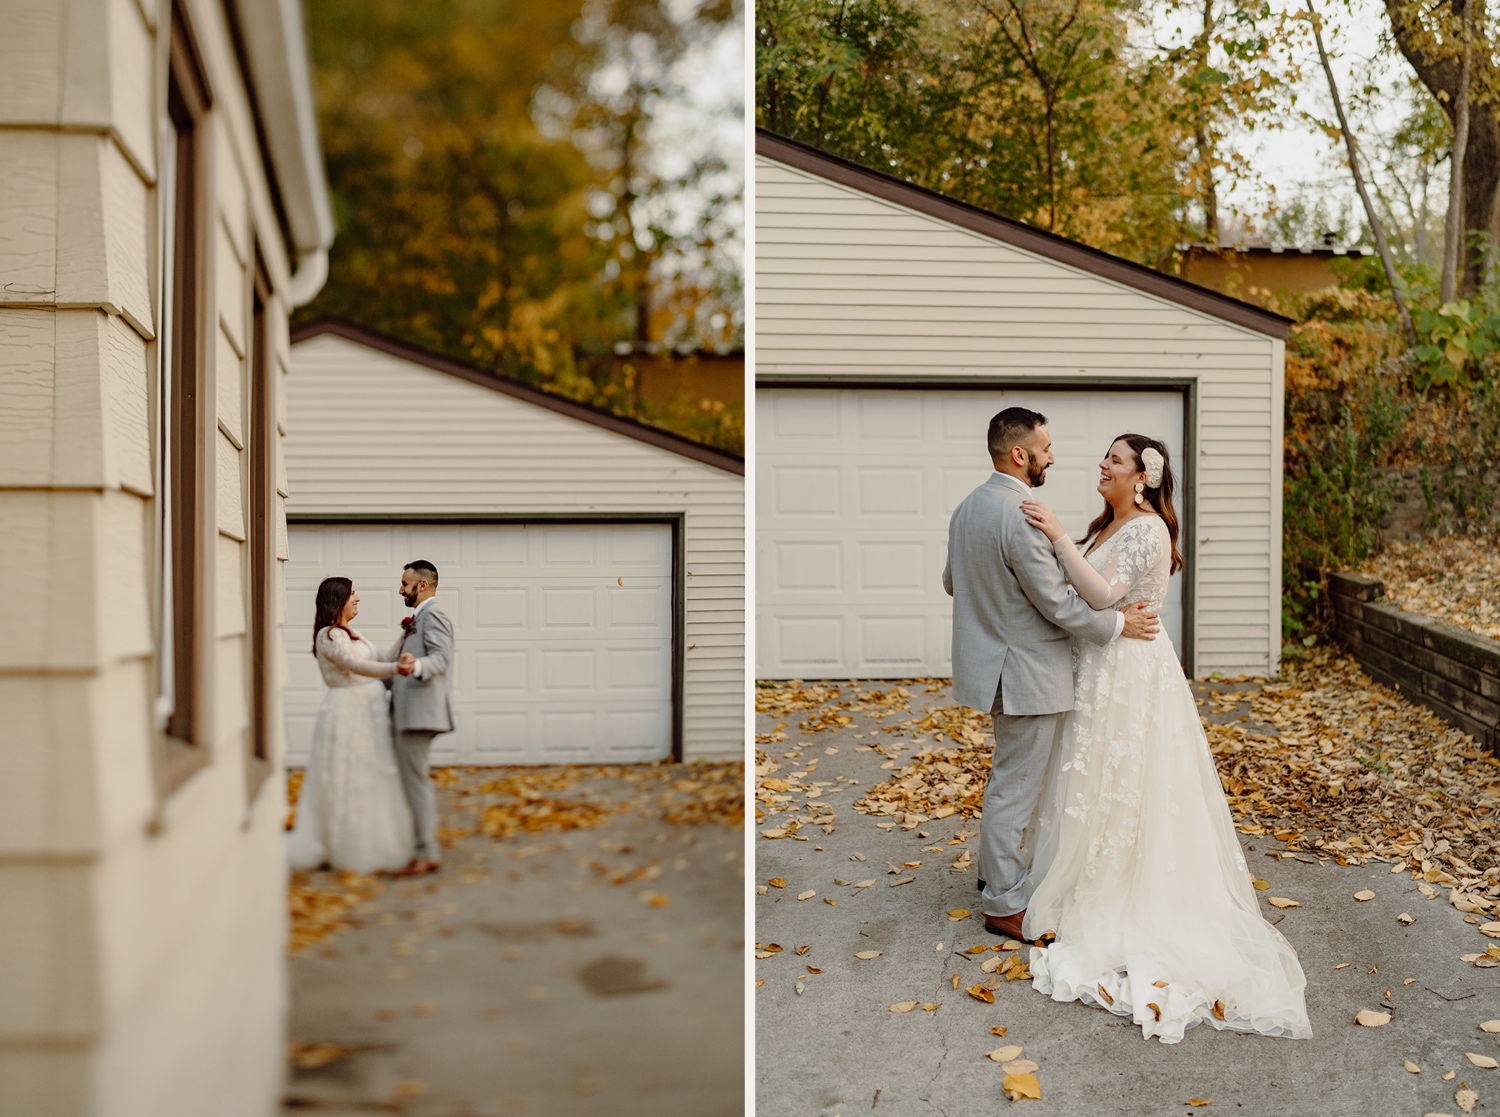 Photos of a bride and groom doing their first dance in their front yard. Fall leaves all over the ground.